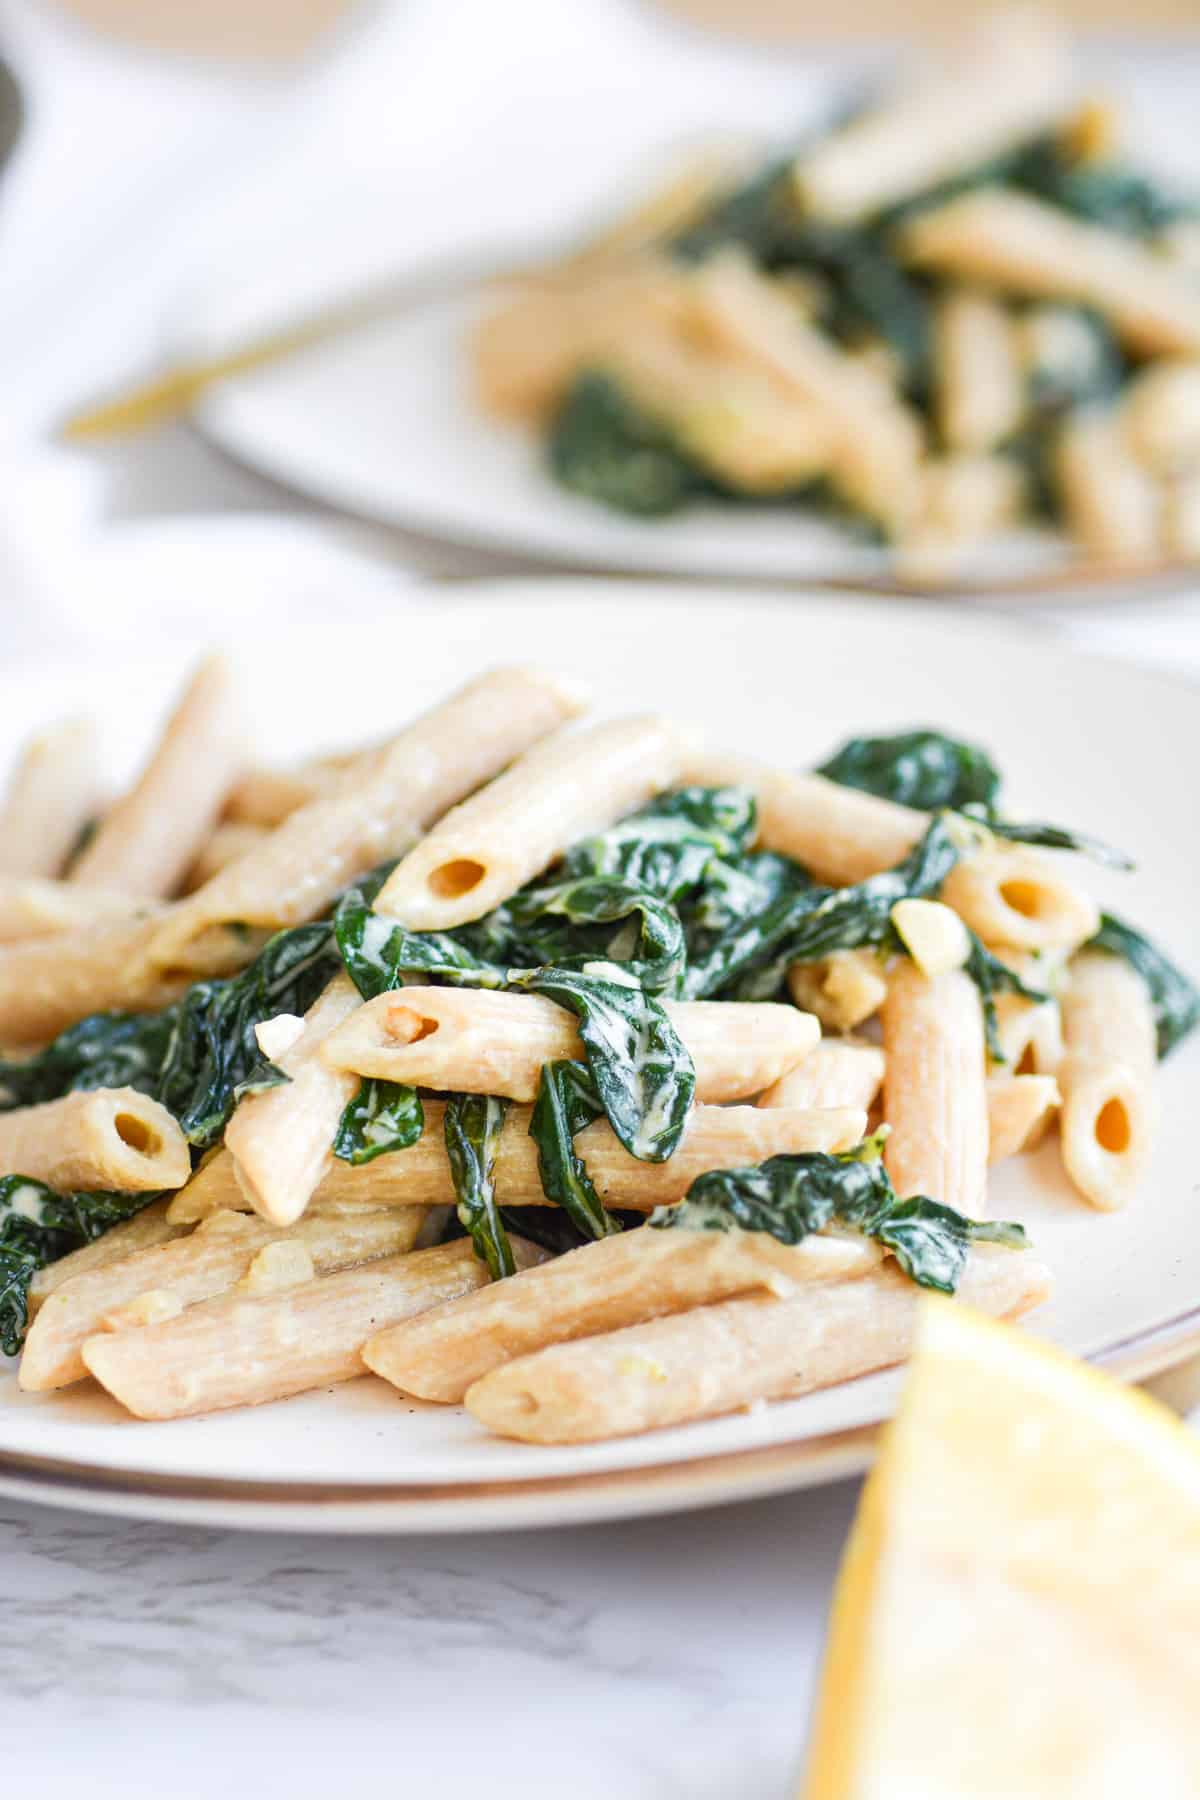 Creamy Vegan Tahini Pasta on a plate with a lemon wedge in the foreground